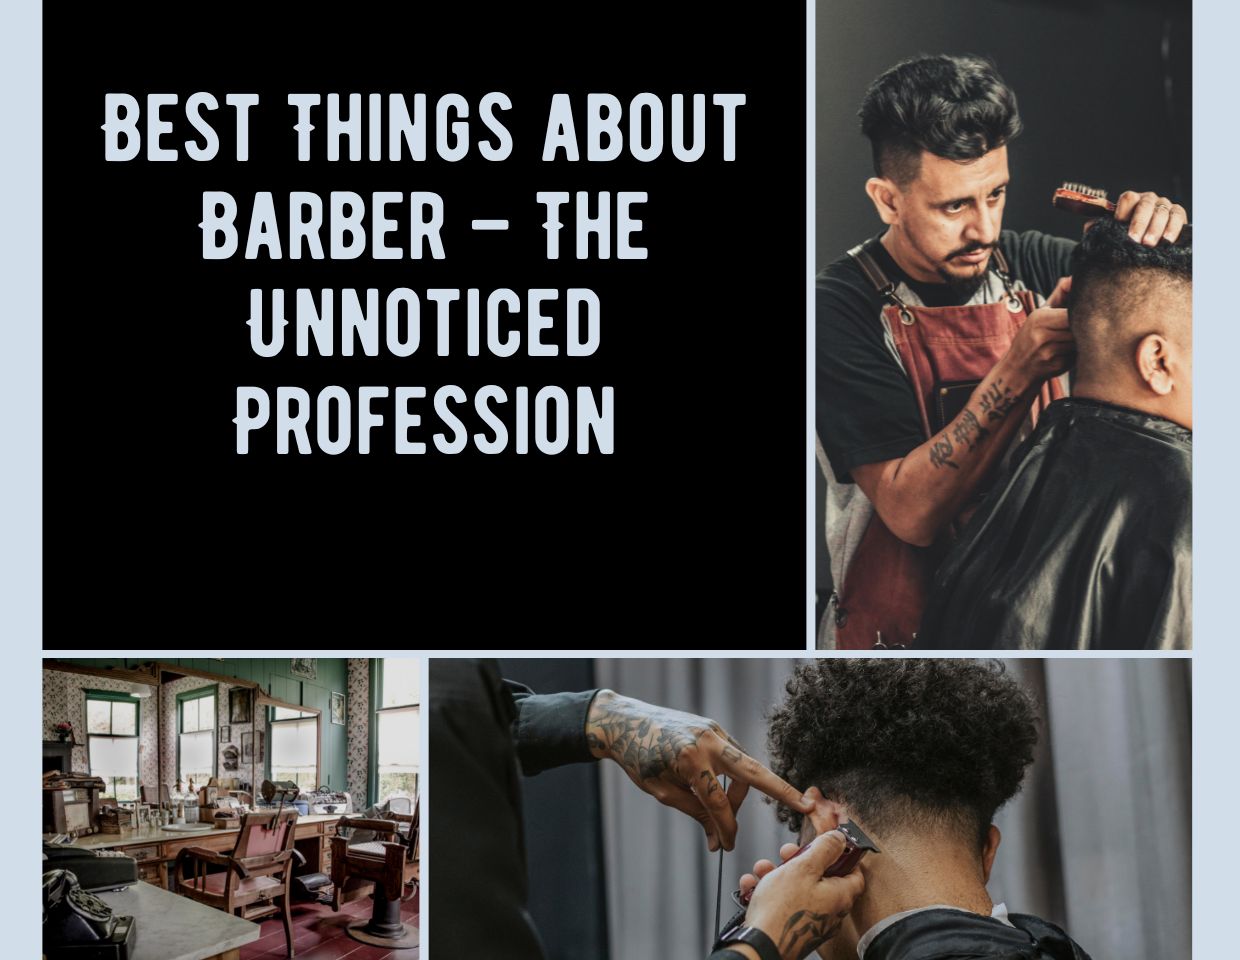 bestthings-about-barber-person